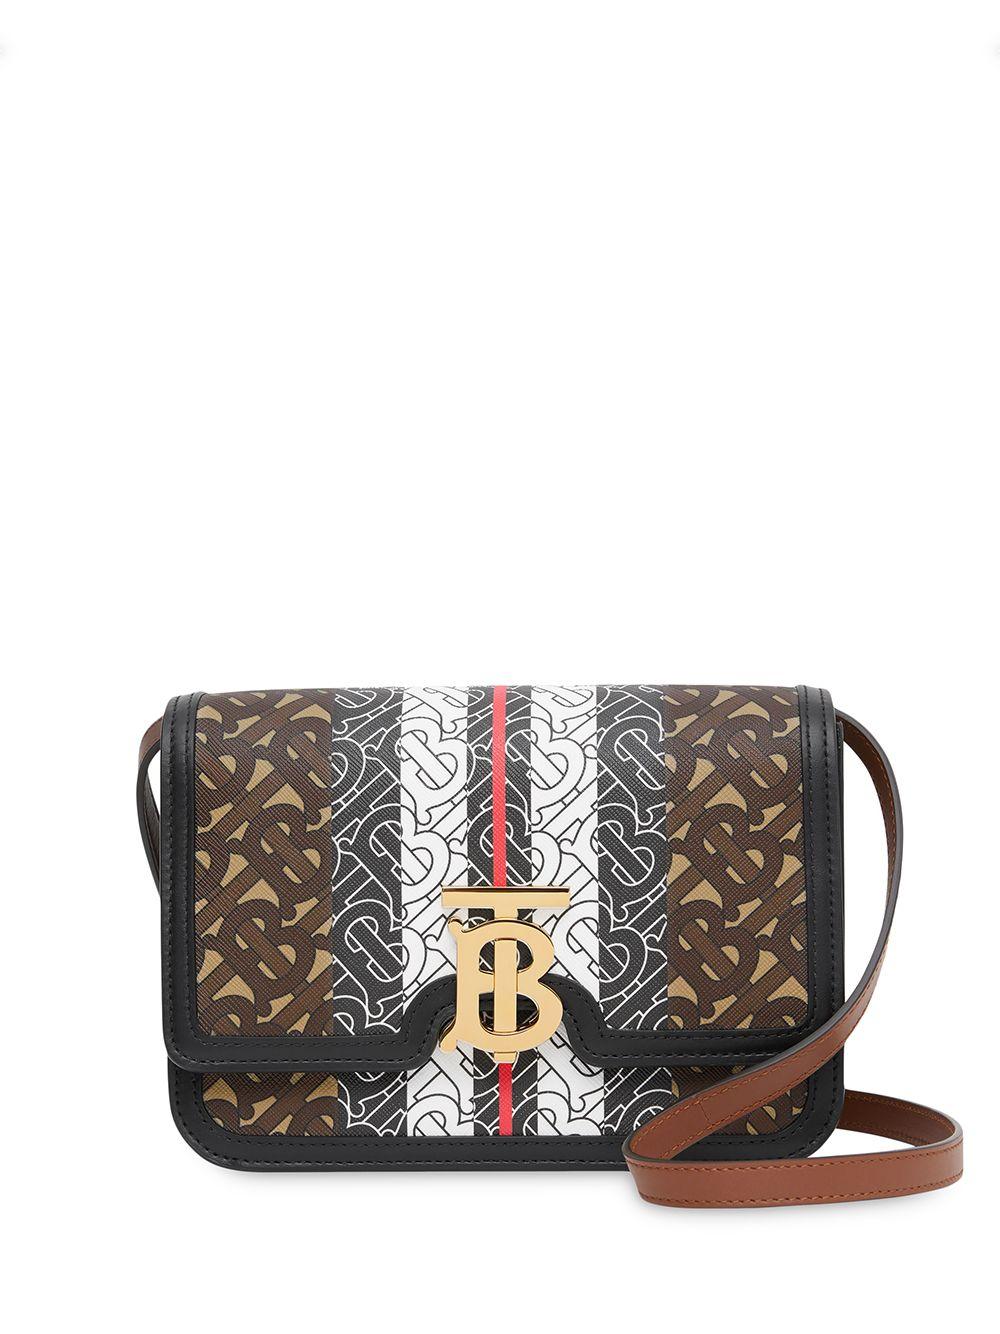 Burberry Canvas Small Monogram Stripe Tb Shoulder Bag in Brown - Lyst